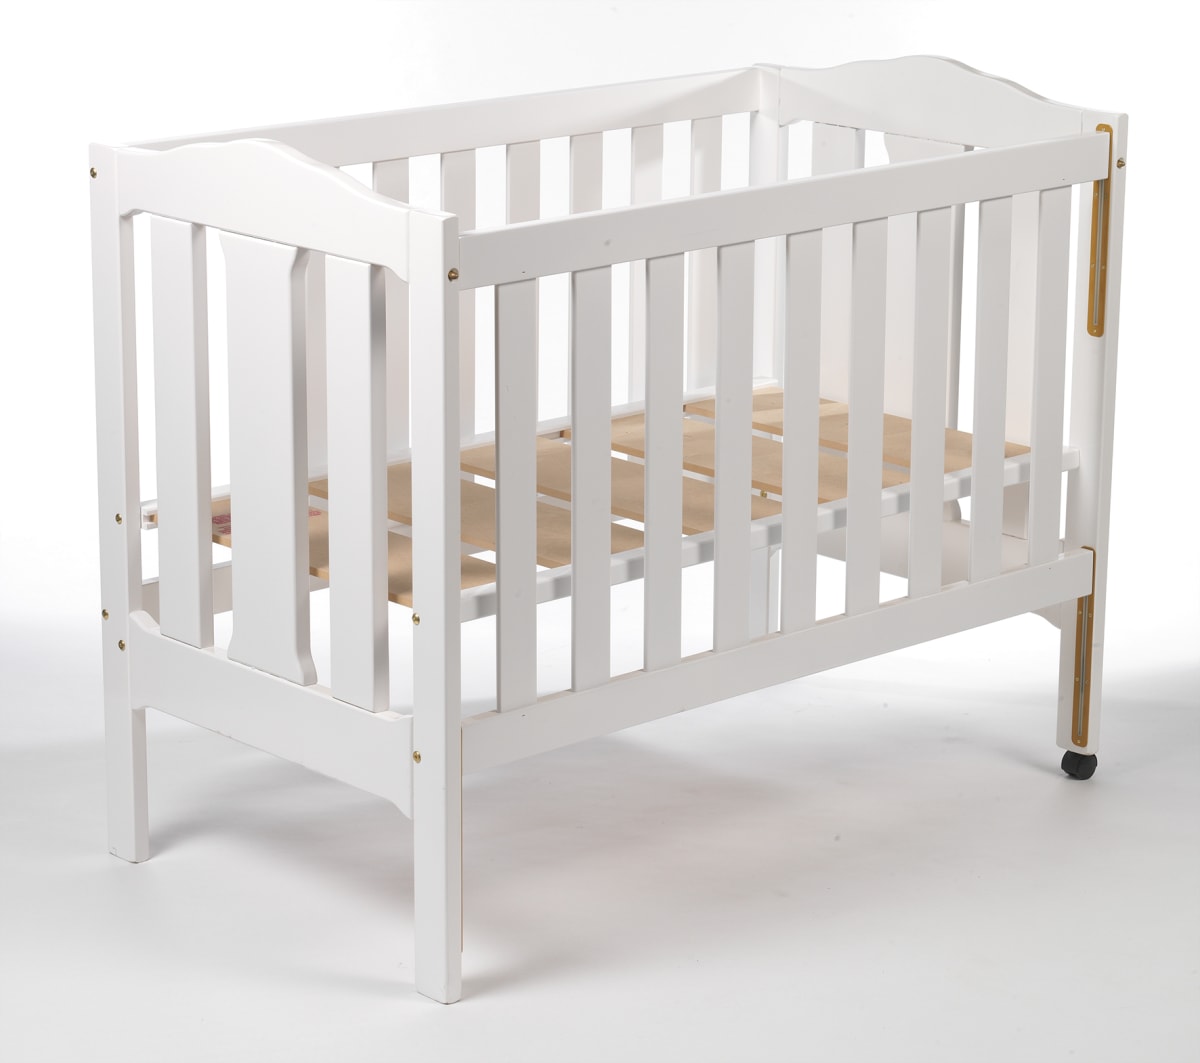 Cot (Make sure it's safe and comply with safety regulations)